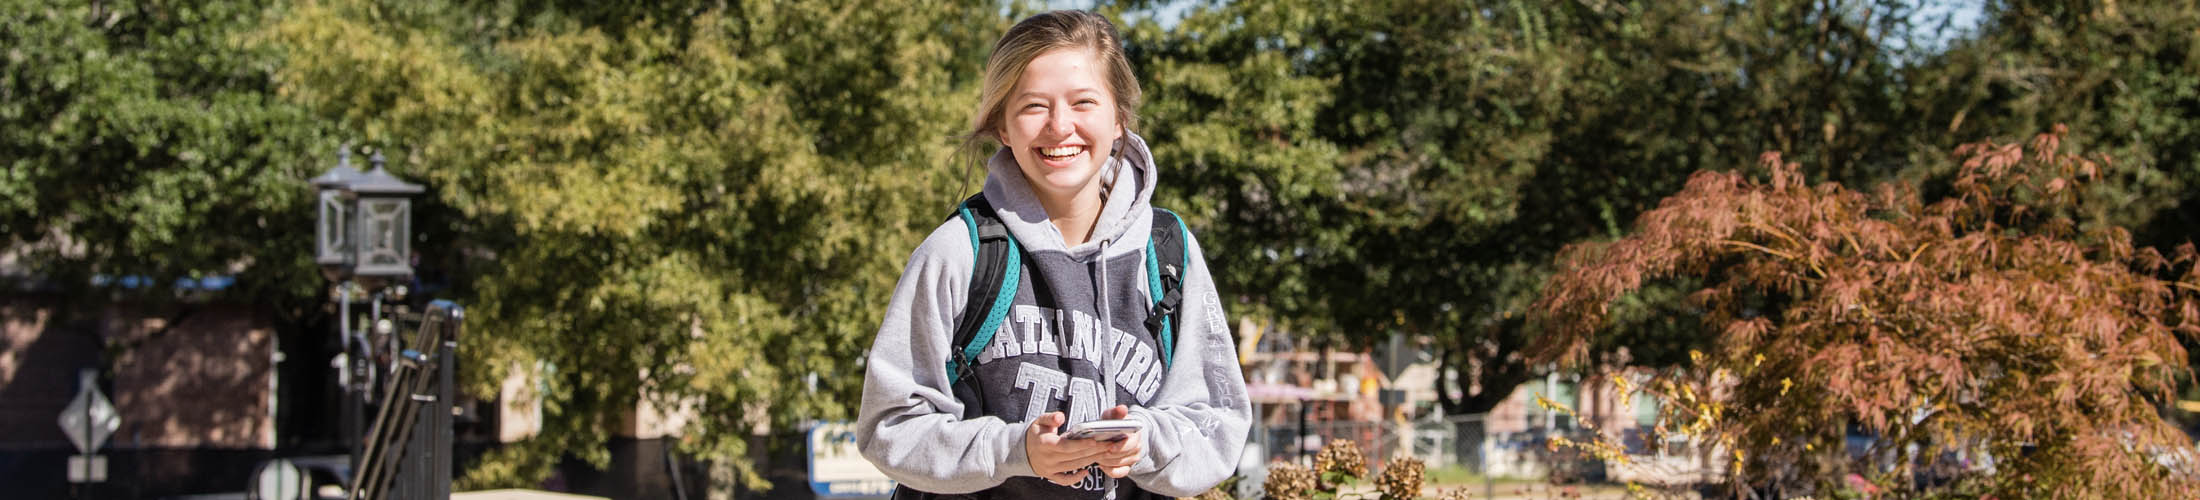 Female student smiling wearing backpack walking on campus.